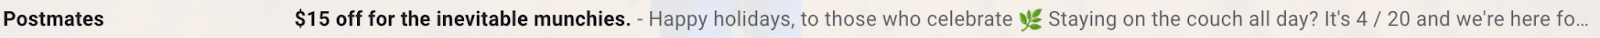 Postmates email subject line